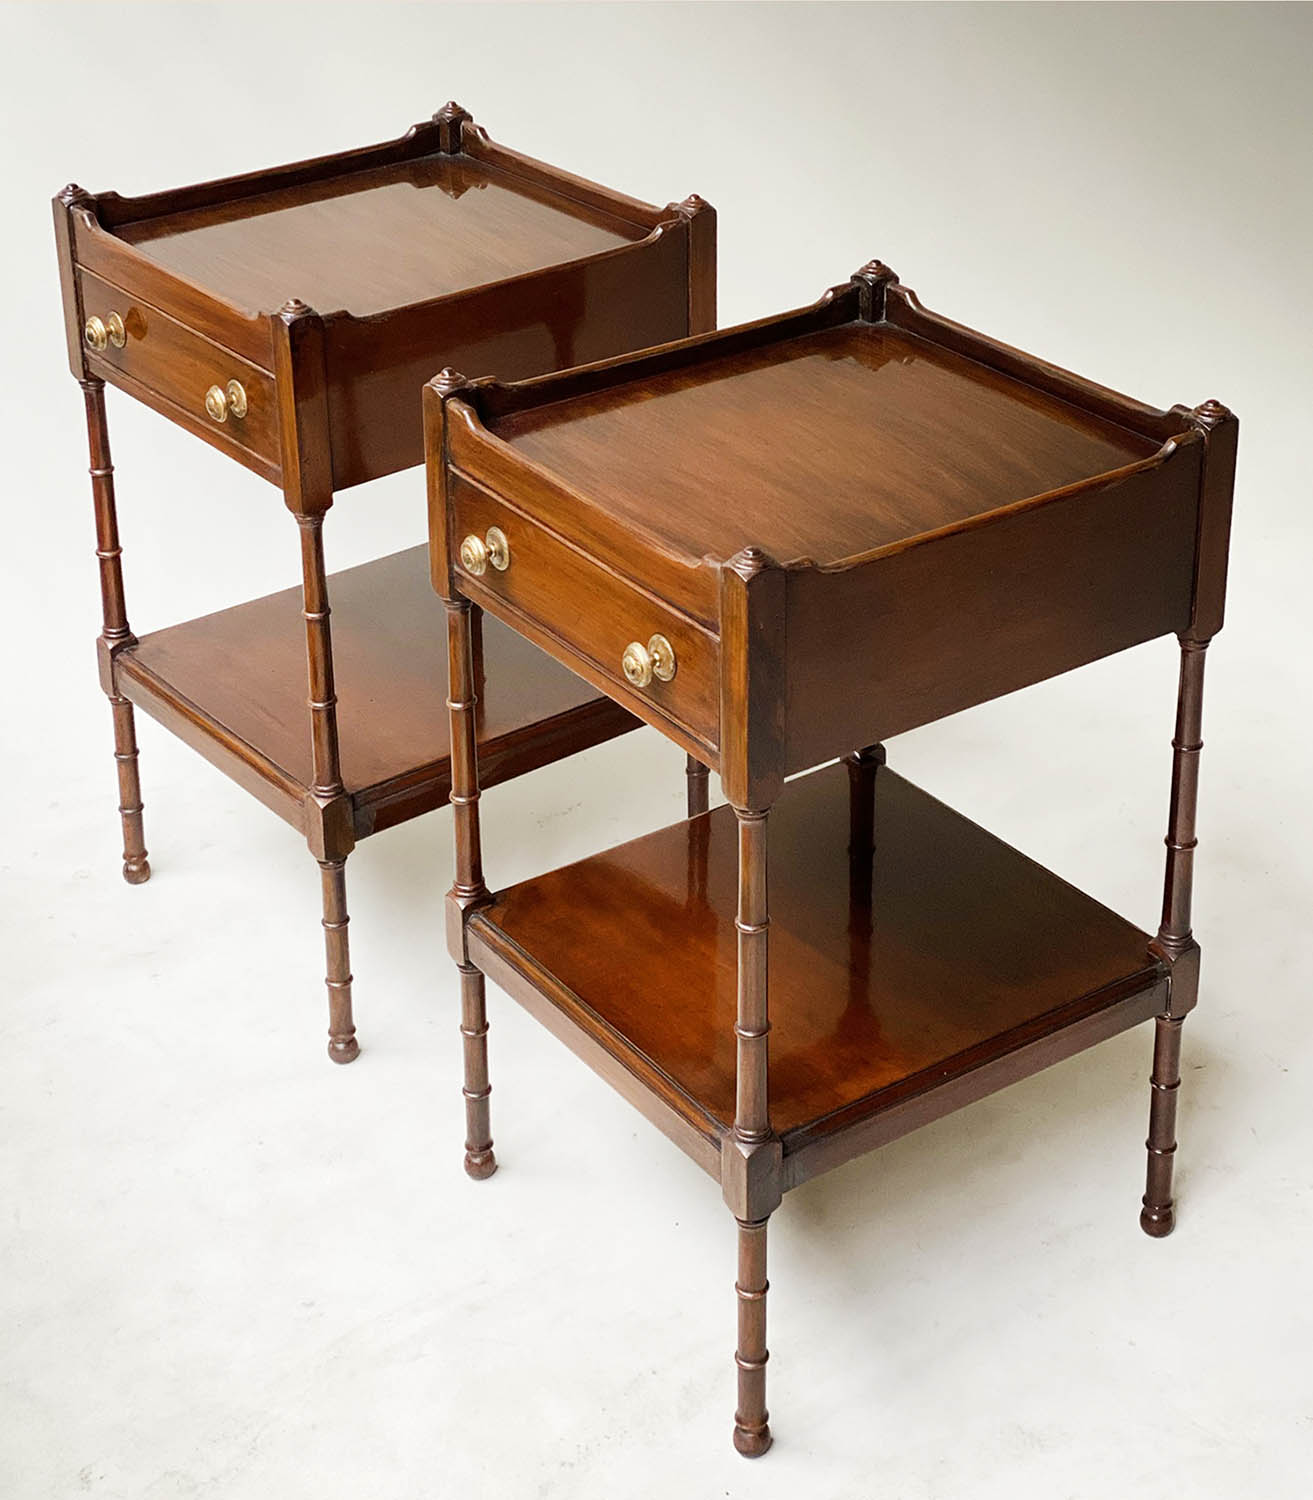 LAMP TABLES, a pair, George III design mahogany, each galleried with frieze drawer and under tier, - Image 8 of 8